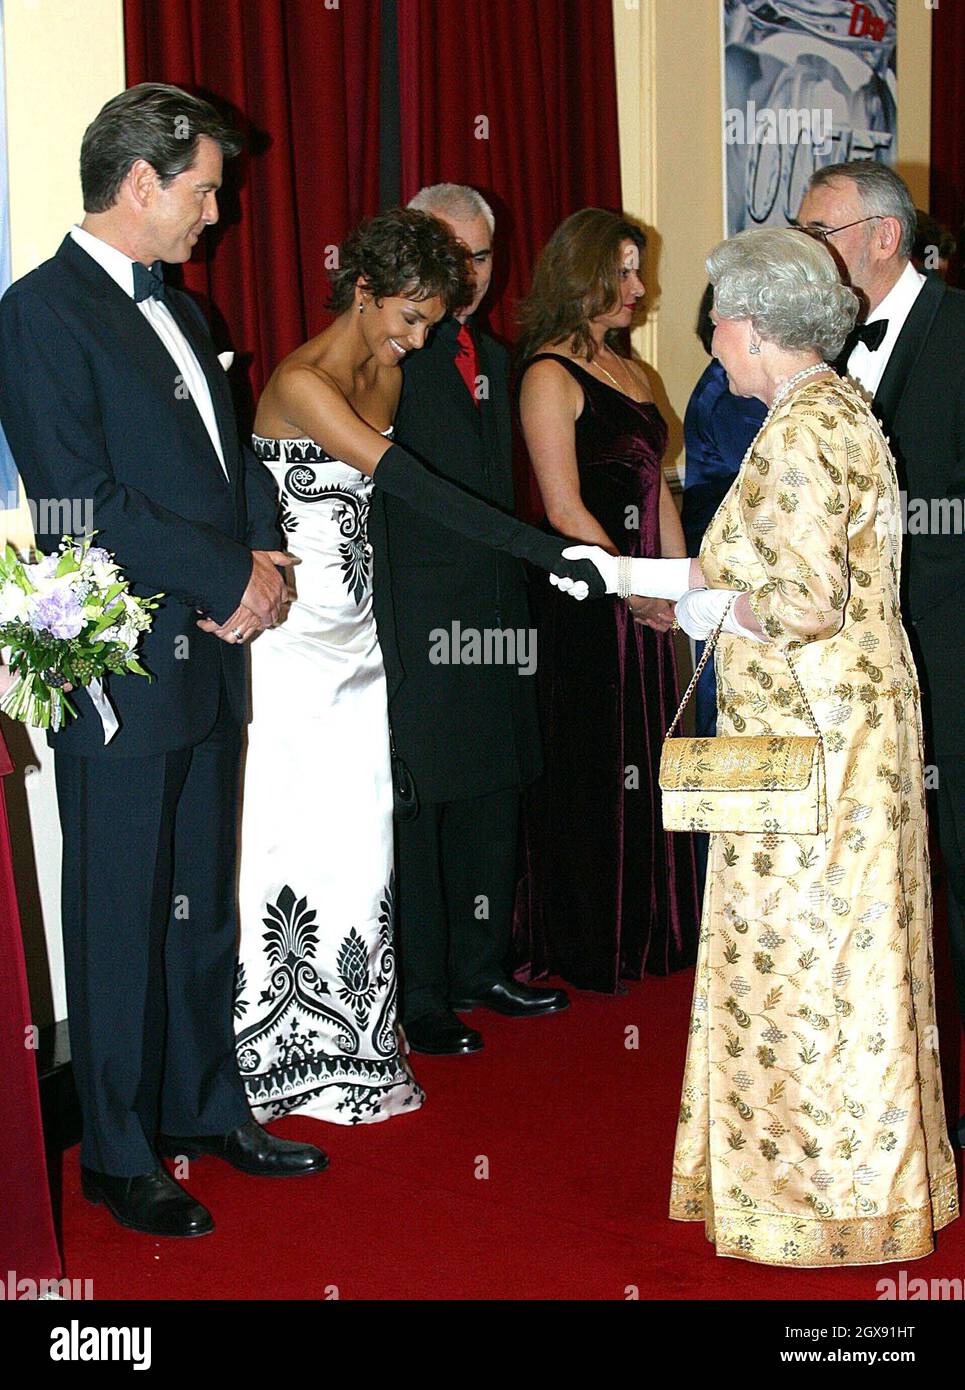 Halle Berry meets Her Majesty Queen Elizabeth II at the World Premiere of  the James Bond film Die Another Day held at London's Royal Albert Hall.  full length. strapless dress. black gloves.